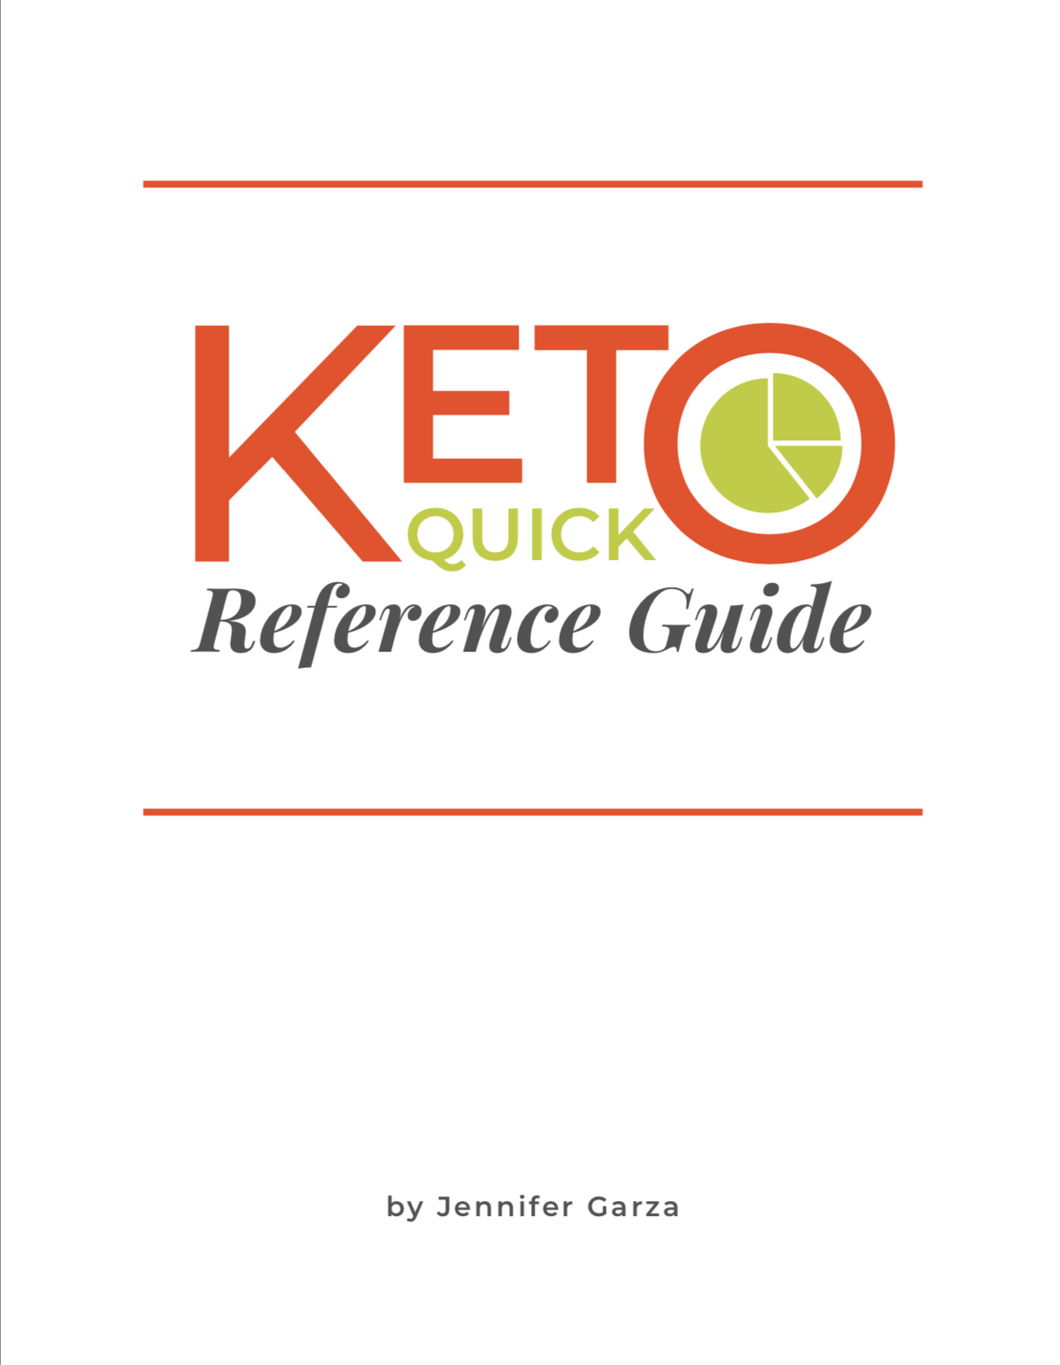 Keto Quick Reference Guide